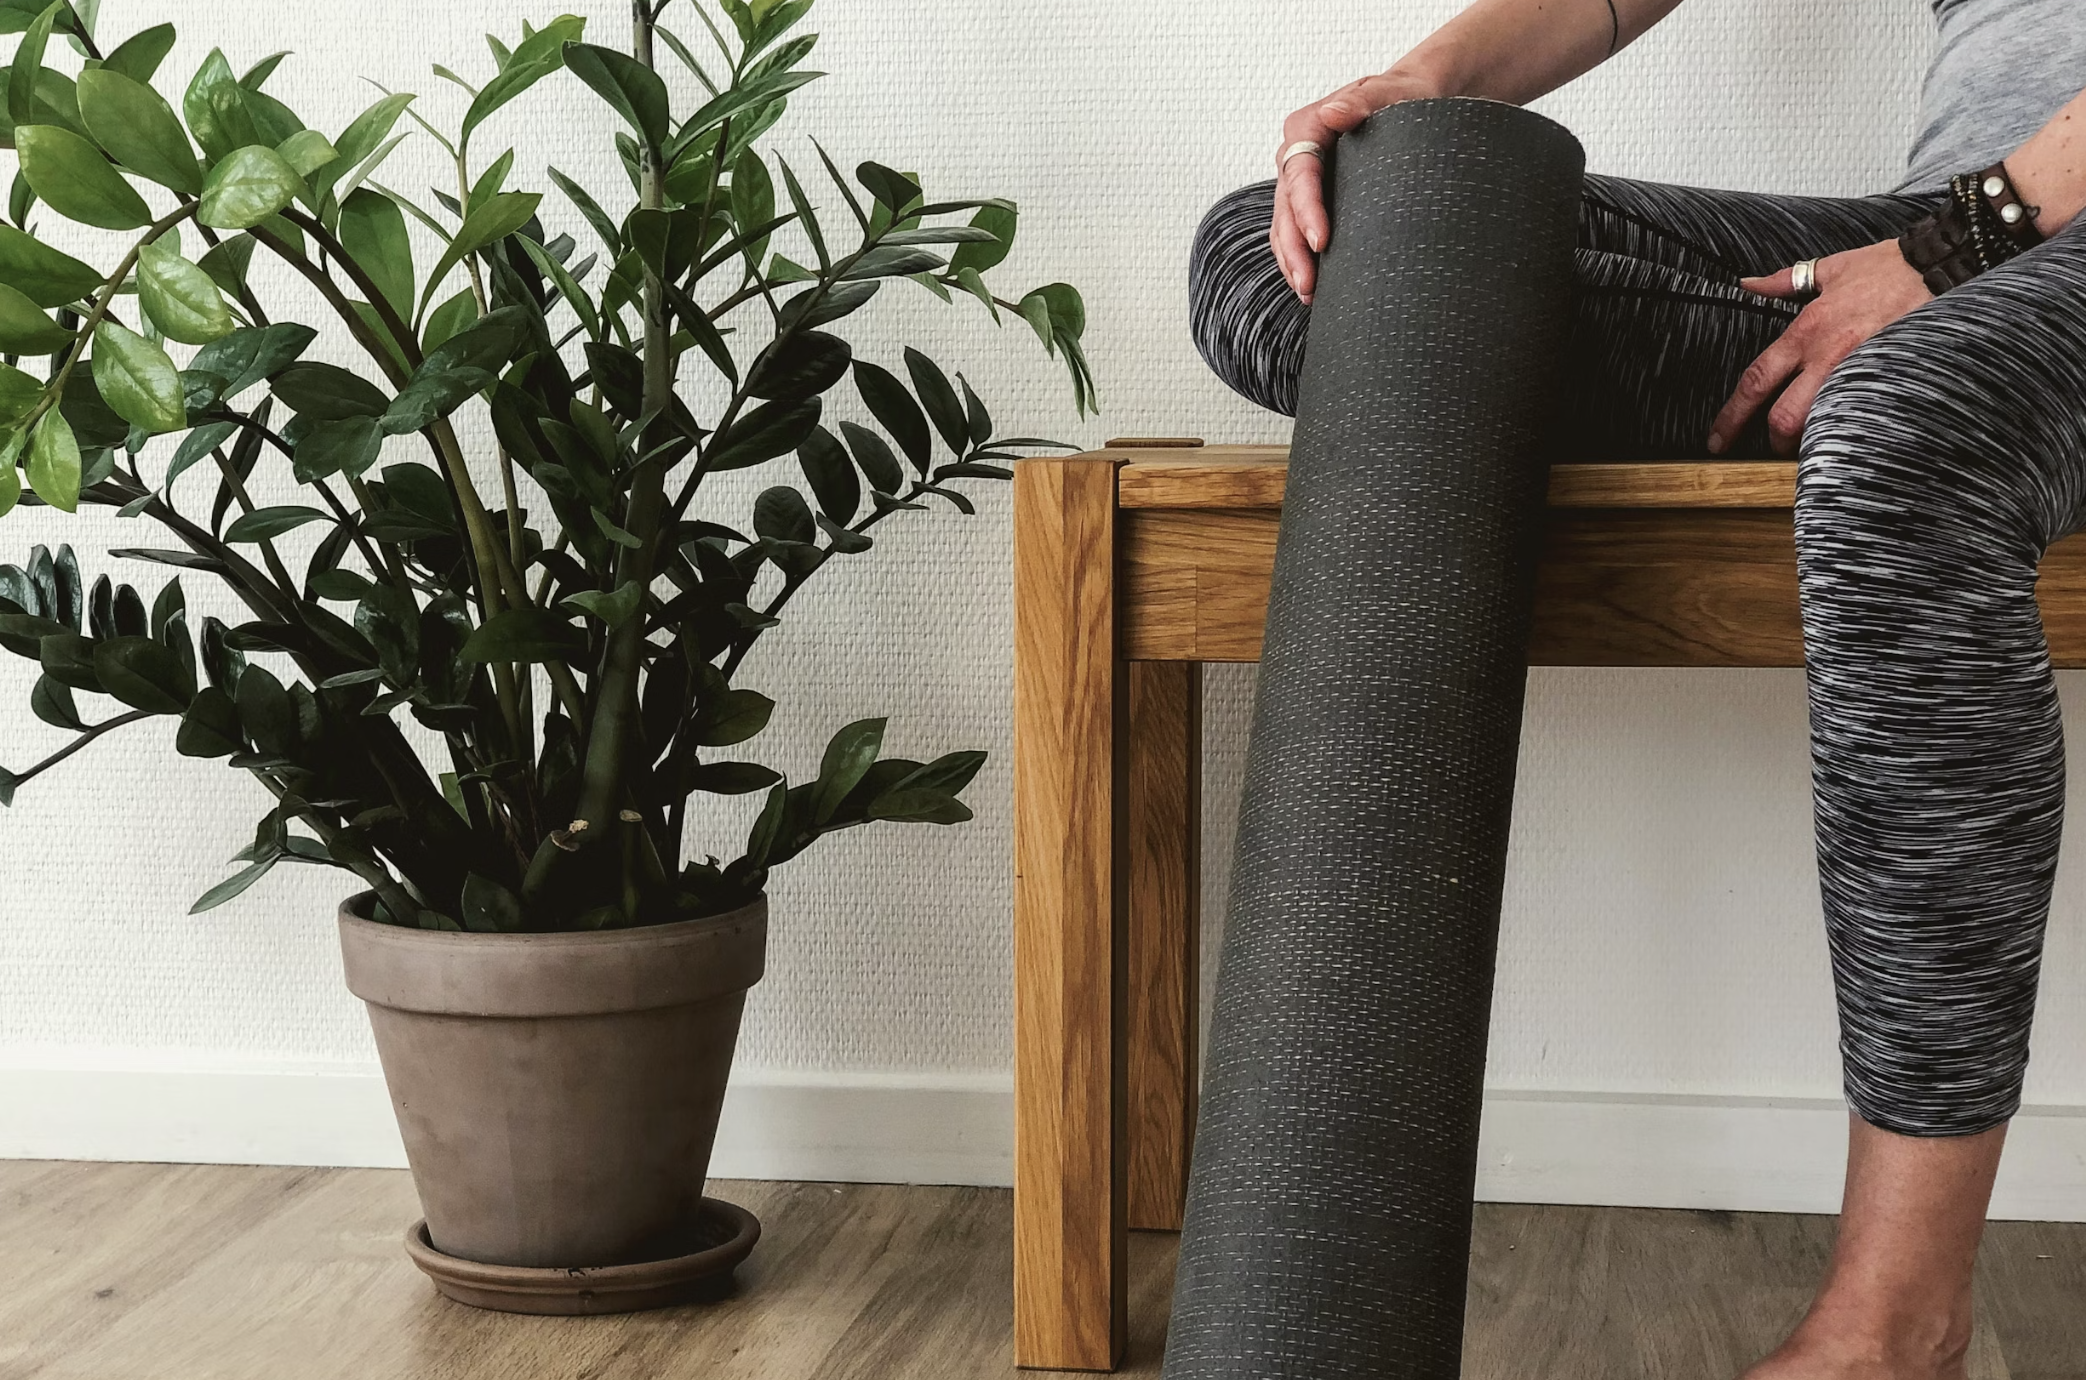 Discover the Perfect Yoga Mats: Top Picks on Amazon